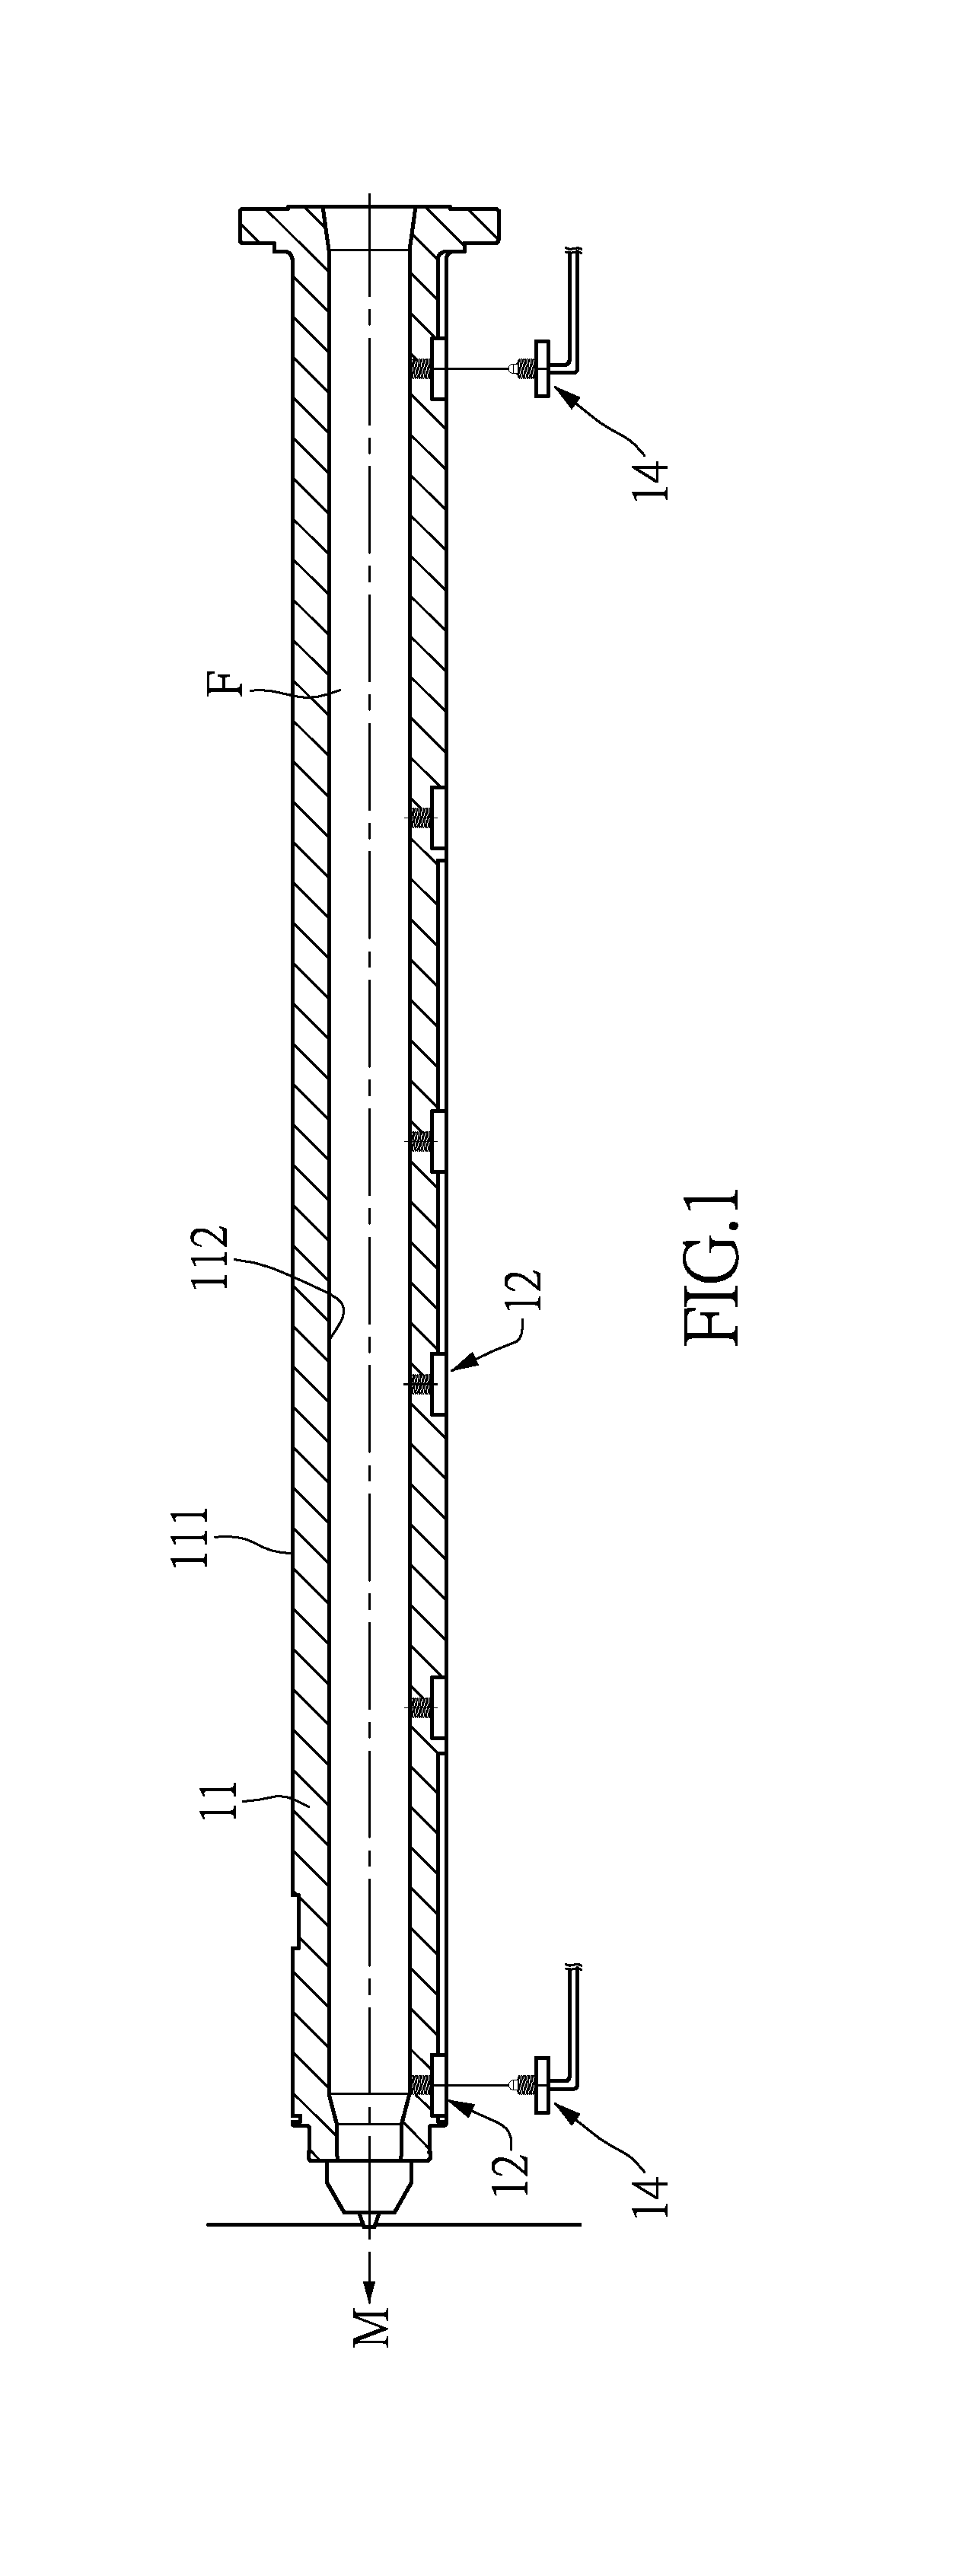 Temperature measurement component embedded hot runner nozzle structure